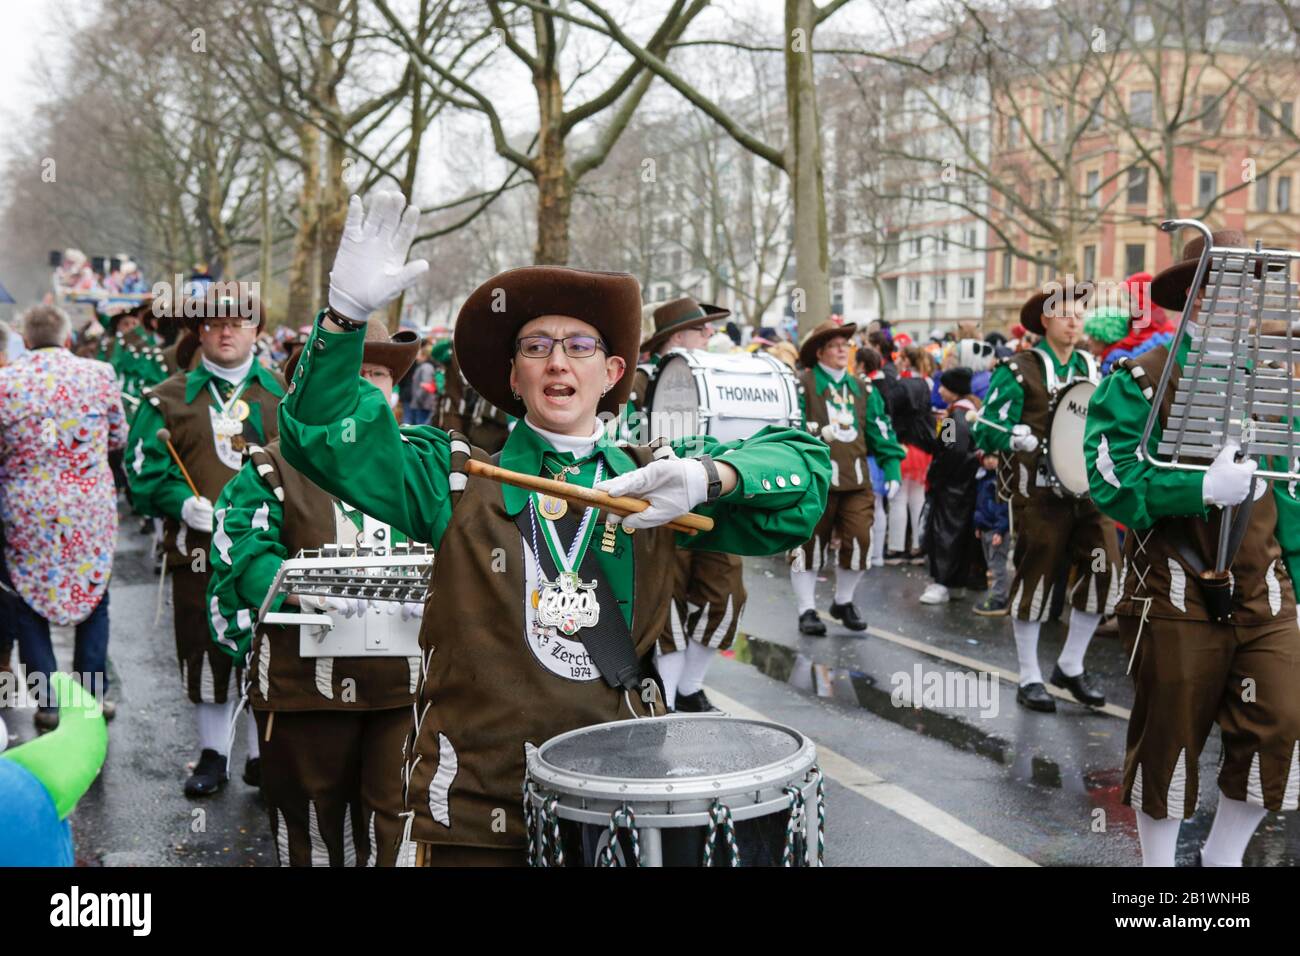 Mainz, Germany. 24th February 2020. Members of the fanfare band Fanfarenzug Die Lerchen Mainz march in the the Mainz Rose Monday parade. Around half a million people lined the streets of Mainz for the traditional Rose Monday Carnival Parade. The 9 km long parade with over 9,000 participants is one of the three large Rose Monday Parades in Germany. Stock Photo